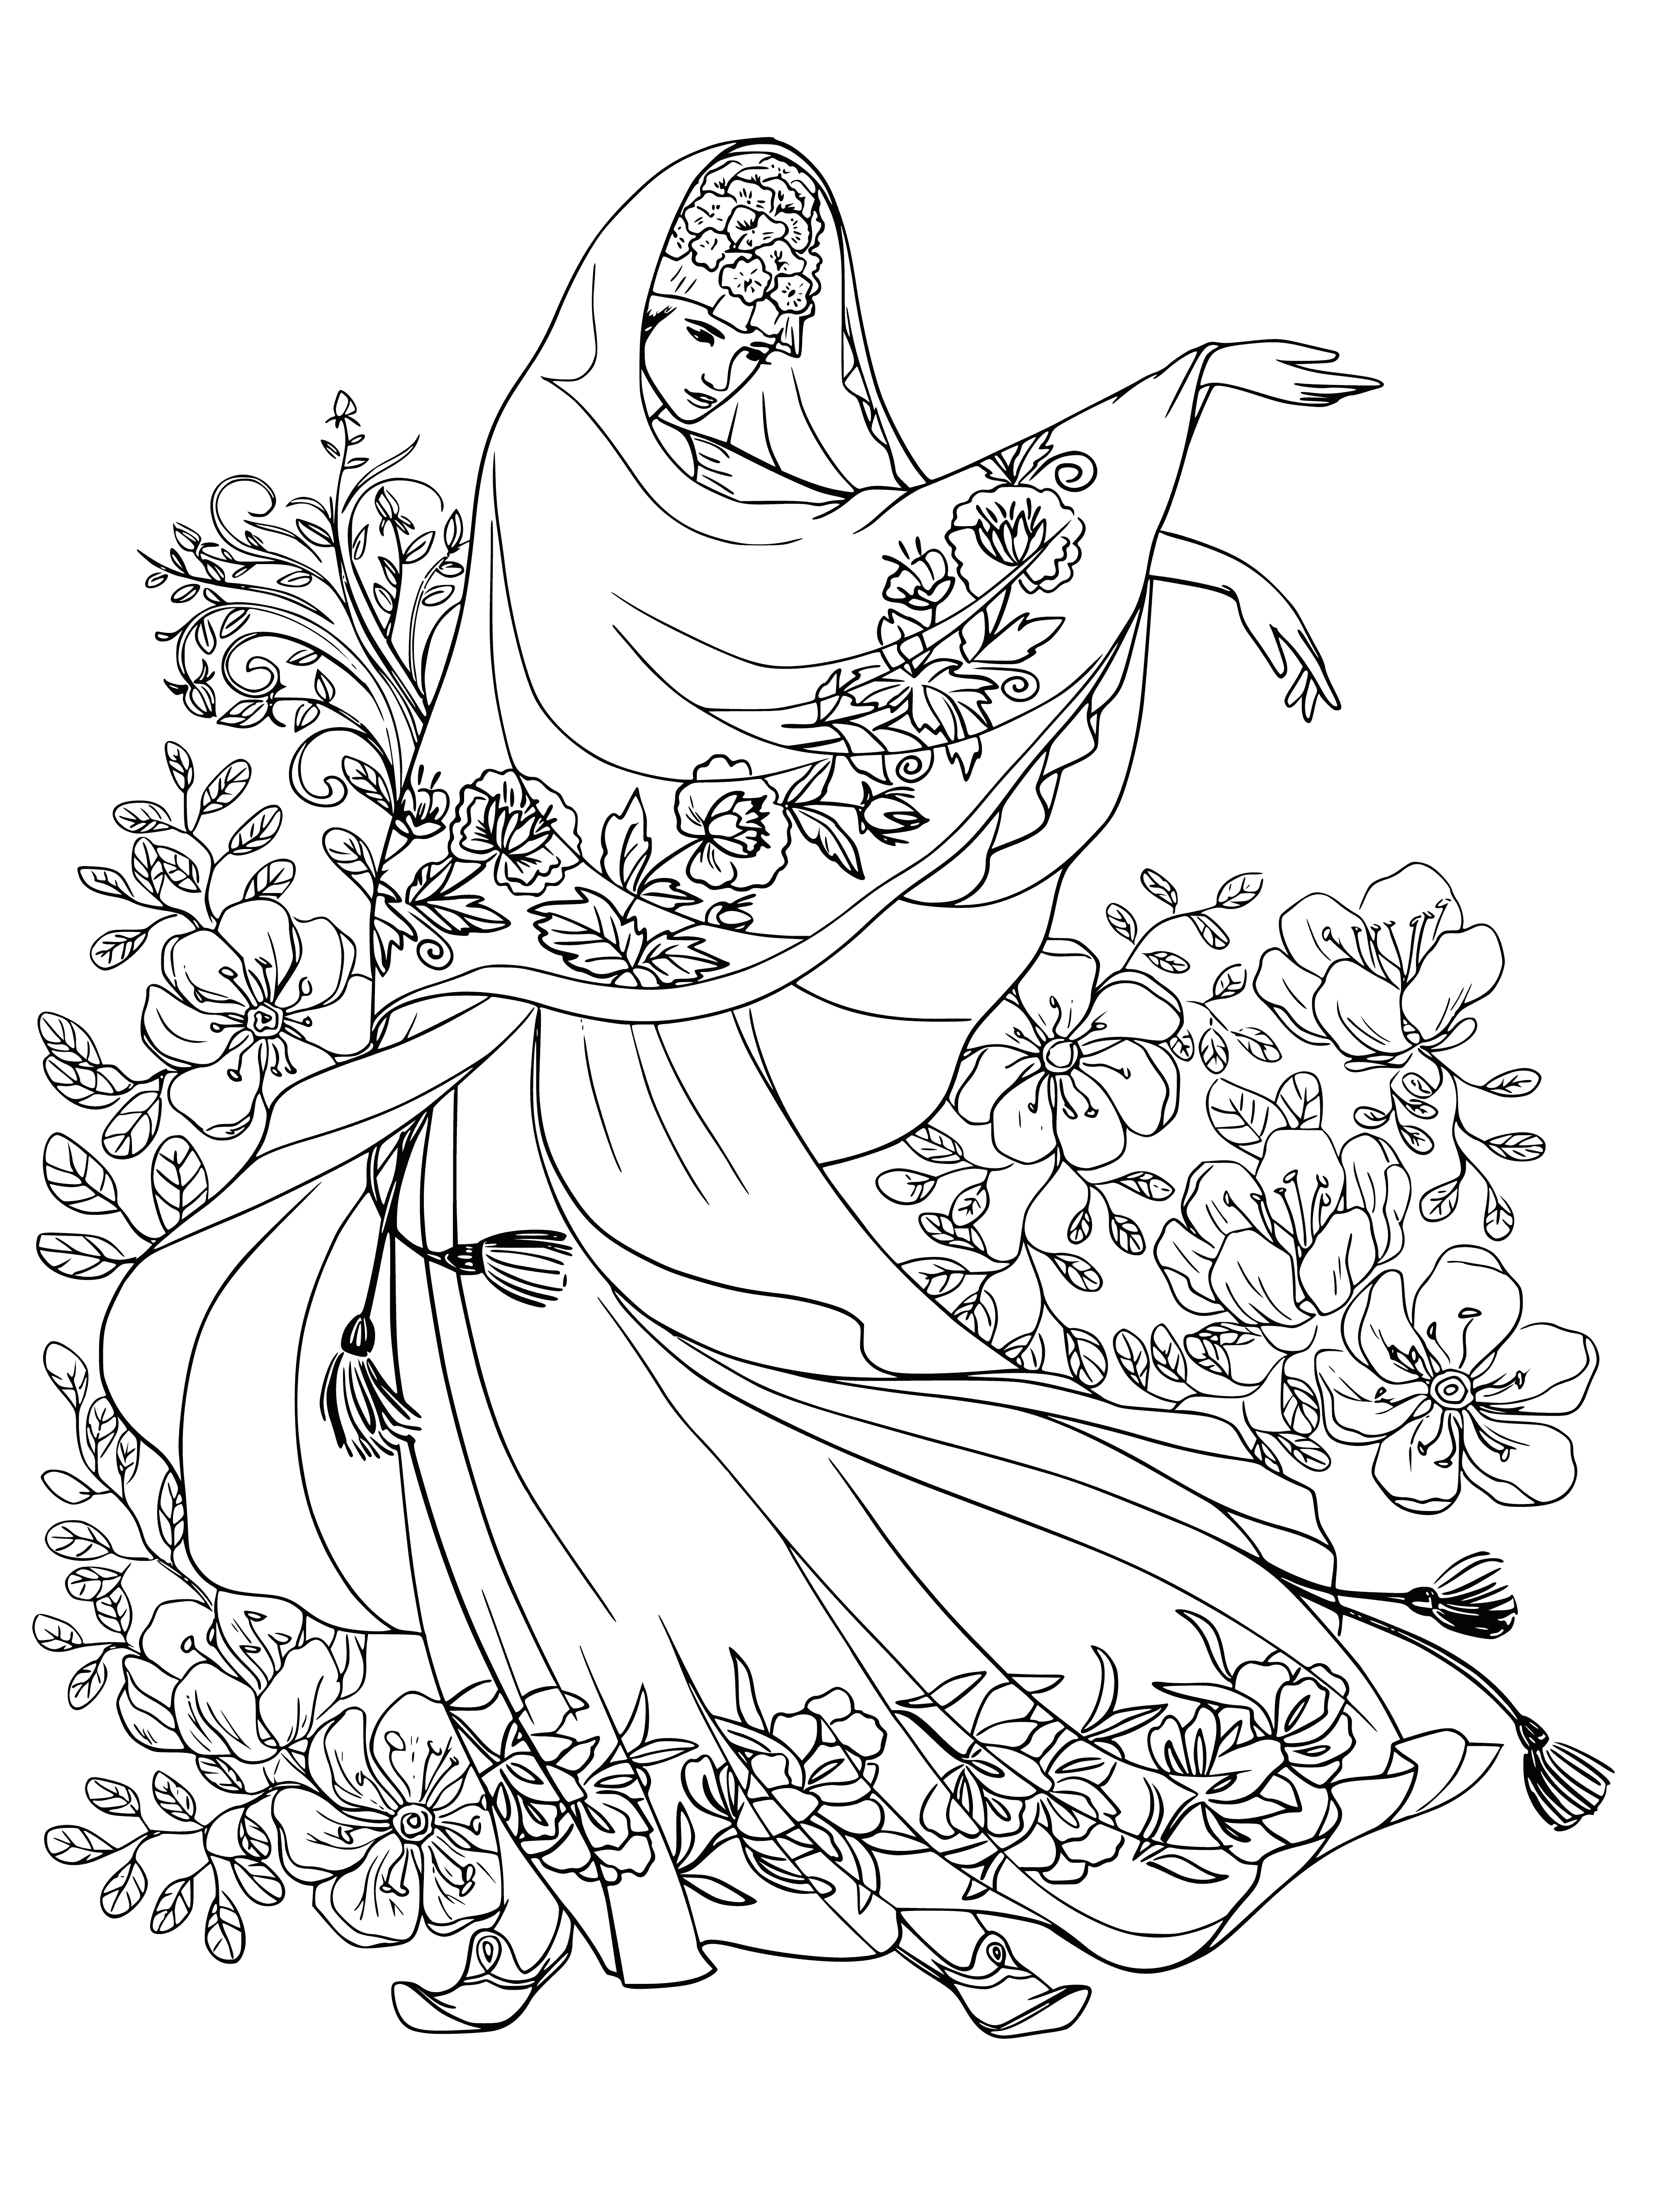 coloring page: Girl in pink dress stands in garden, bird on shoulder, surrounded by flowers.